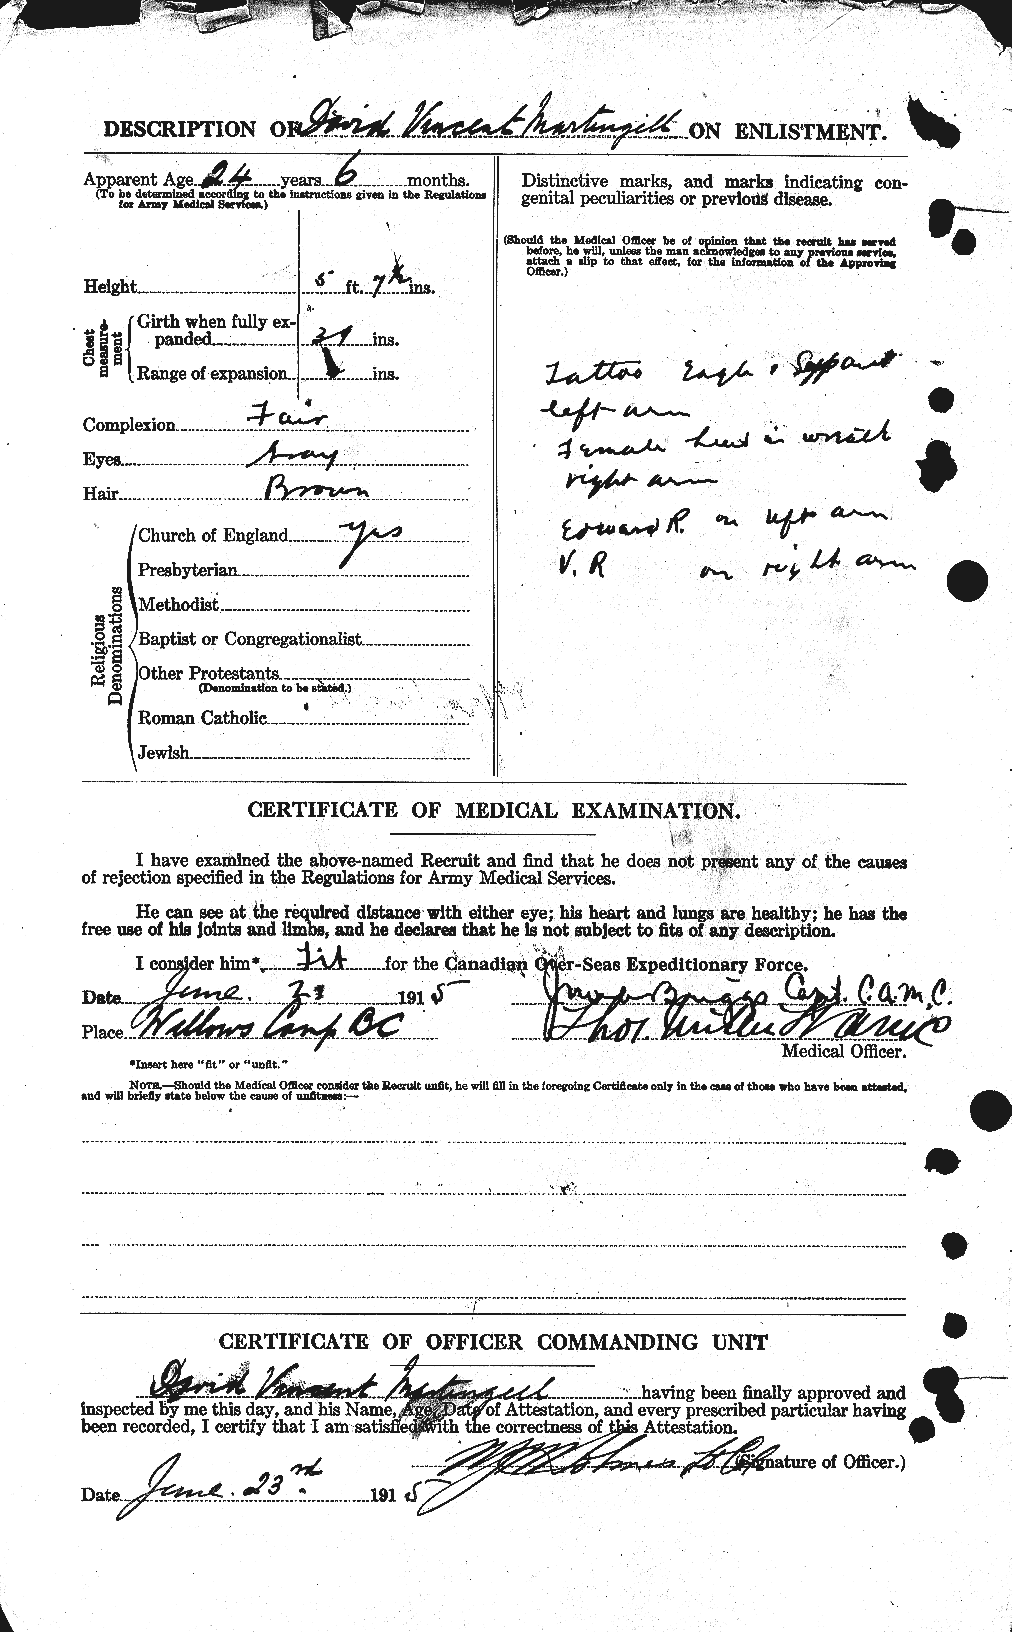 Personnel Records of the First World War - CEF 485980b